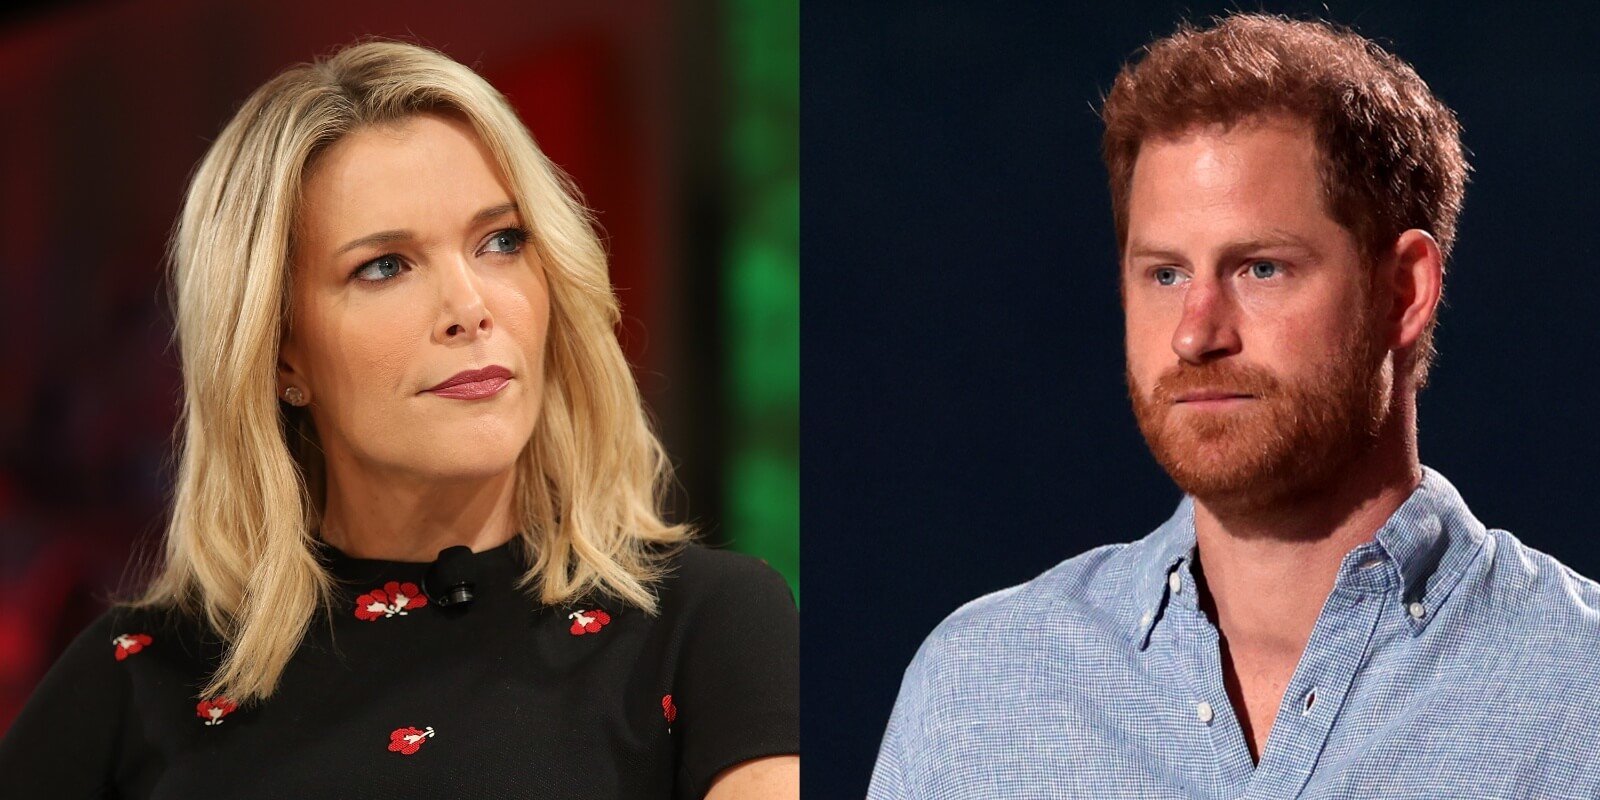 Megyn Kelly and Prince Harry in side-by-side photographs.